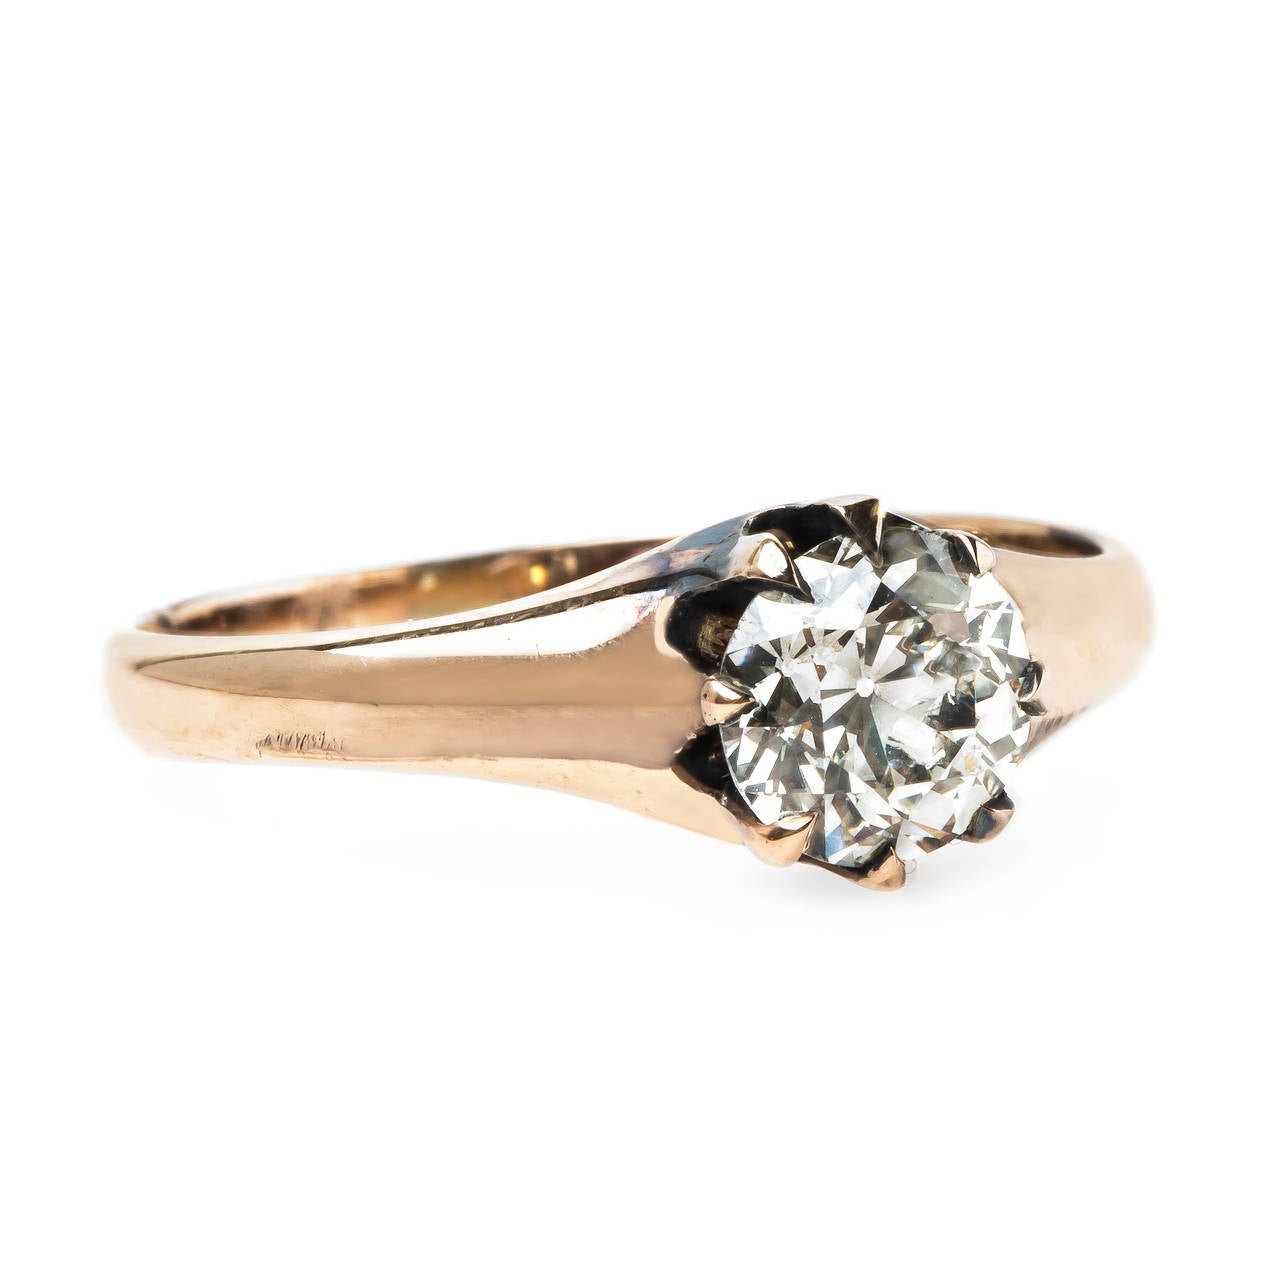 Eaglewood is a charming authentic Victorian era (circa 1890) diamond engagement ring made from 14k rose gold centering a 1.02ct EGL certified Old European Cut diamond graded L color and VS2 clarity. This gleaming solitaire diamond engagement ring